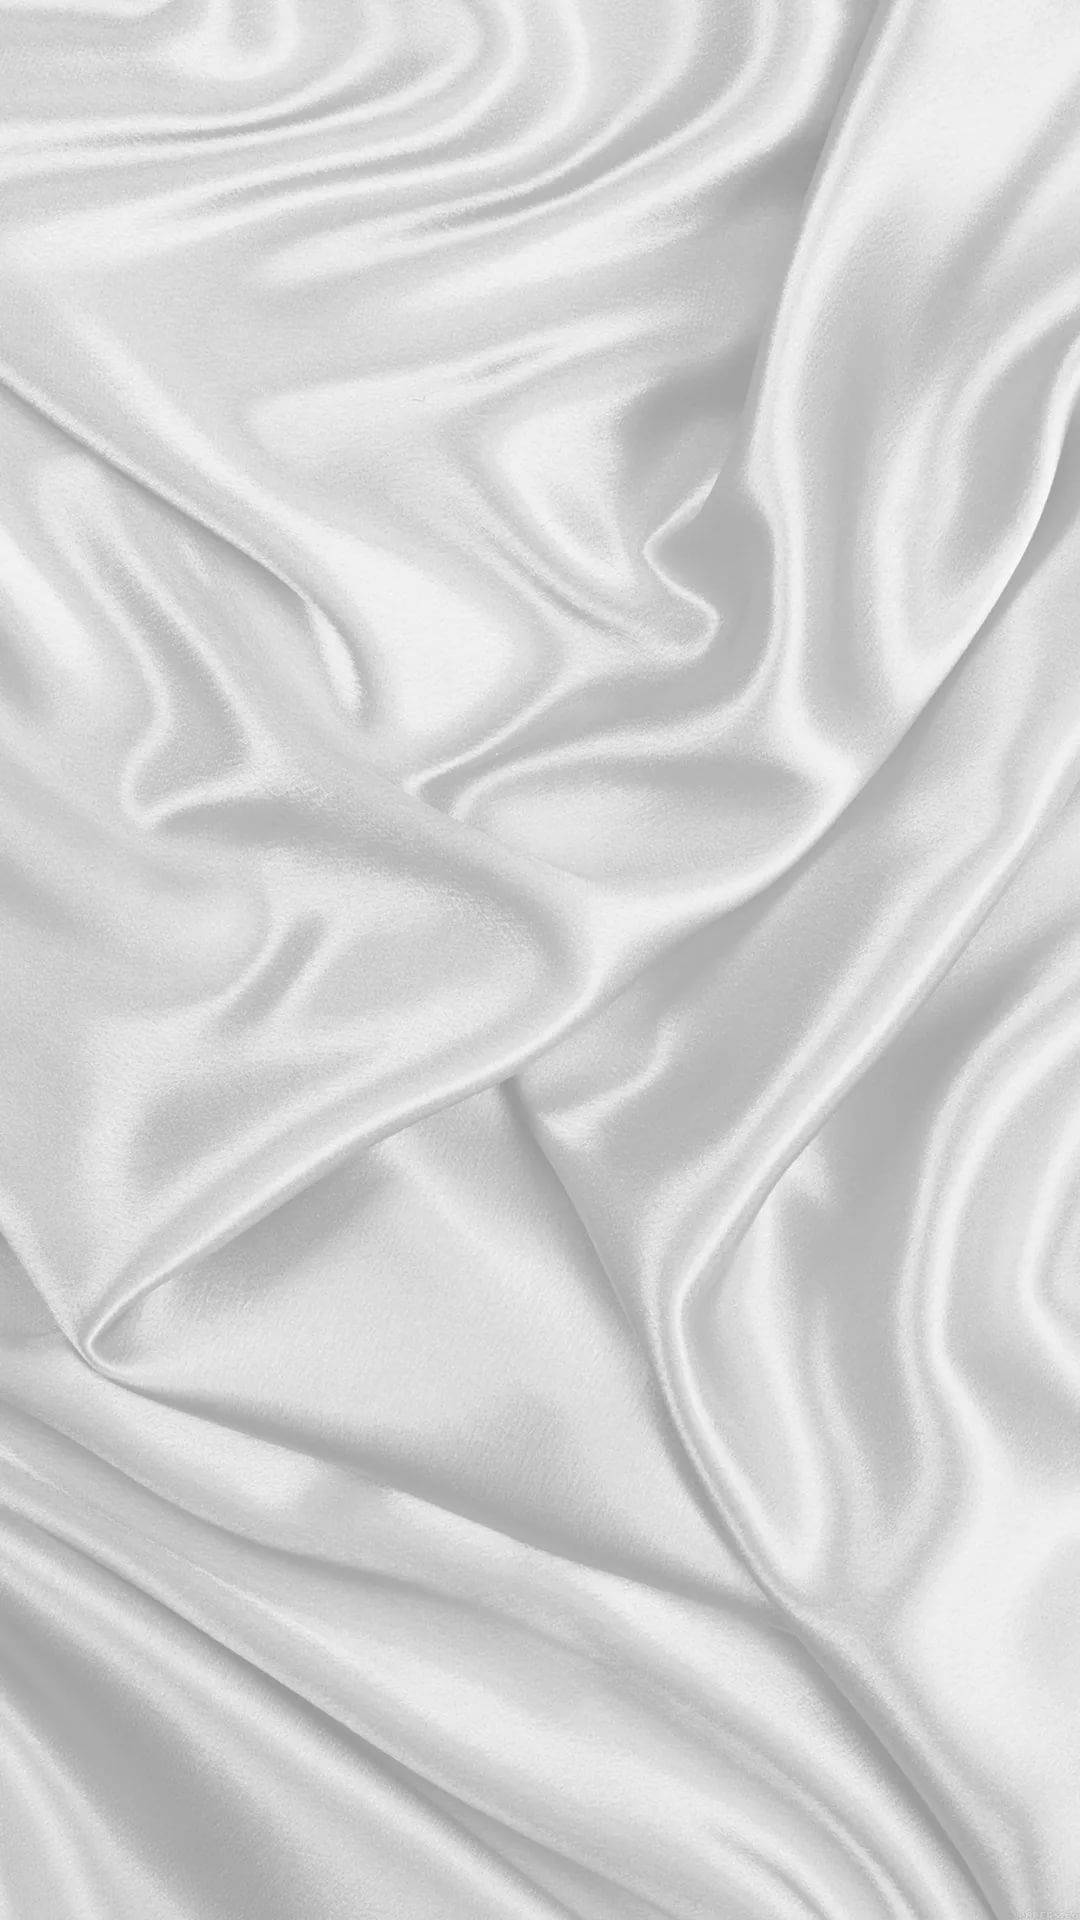 Cool Iphone White Fabric Background